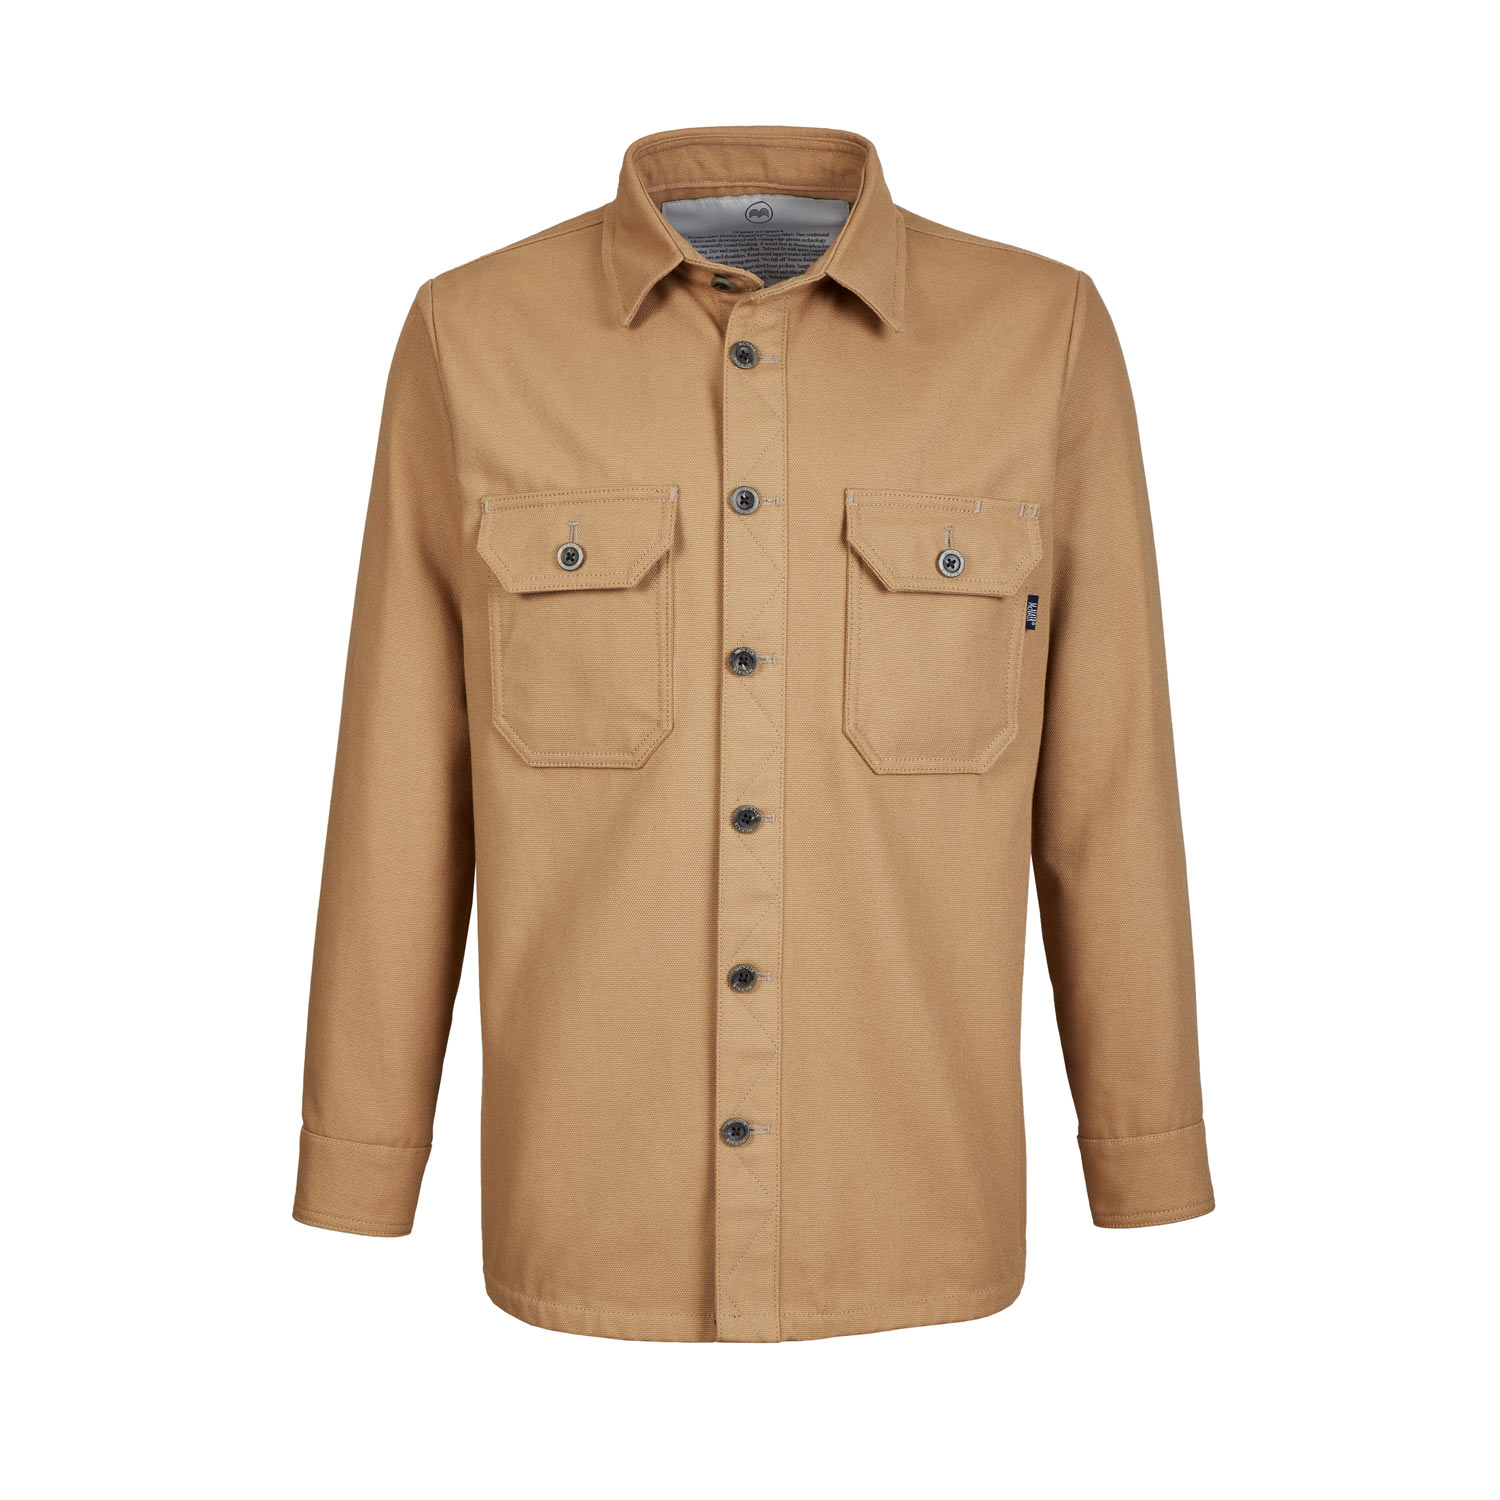 Fable a billion serve Men's PlasmaDry™ Cotton Canvas Work shirt - made to measure - McNair shirts